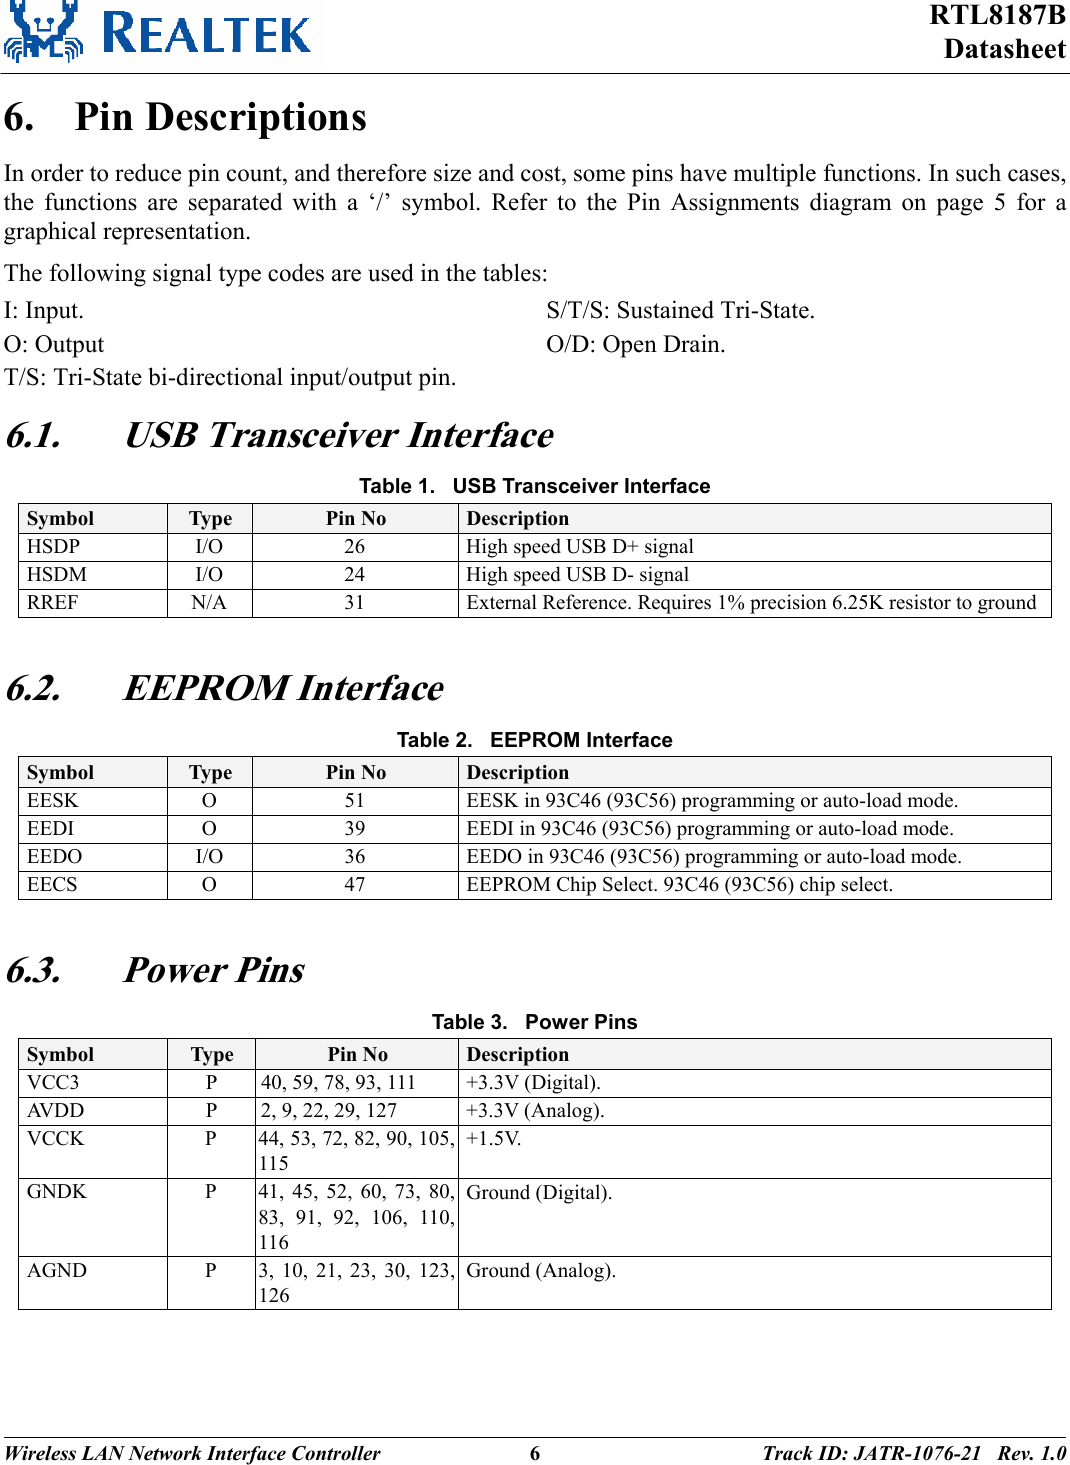 RTL8187B Datasheet Wireless LAN Network Interface Controller  6 Track ID: JATR-1076-21   Rev. 1.0  6. Pin Descriptions In order to reduce pin count, and therefore size and cost, some pins have multiple functions. In such cases, the functions are separated with a ‘/’ symbol. Refer to the Pin Assignments diagram on page 5 for a graphical representation. The following signal type codes are used in the tables: I: Input. O: Output T/S: Tri-State bi-directional input/output pin. S/T/S: Sustained Tri-State. O/D: Open Drain. 6.1. USB Transceiver Interface Table 1.   USB Transceiver Interface Symbol  Type  Pin No  Description HSDP  I/O  26  High speed USB D+ signal HSDM  I/O  24  High speed USB D- signal RREF  N/A  31  External Reference. Requires 1% precision 6.25K resistor to ground  6.2. EEPROM Interface Table 2.   EEPROM Interface Symbol  Type  Pin No  Description EESK  O  51  EESK in 93C46 (93C56) programming or auto-load mode. EEDI  O  39  EEDI in 93C46 (93C56) programming or auto-load mode. EEDO  I/O  36  EEDO in 93C46 (93C56) programming or auto-load mode. EECS  O  47  EEPROM Chip Select. 93C46 (93C56) chip select.  6.3. Power Pins Table 3.   Power Pins Symbol  Type  Pin No  Description VCC3  P  40, 59, 78, 93, 111  +3.3V (Digital). AVDD  P  2, 9, 22, 29, 127  +3.3V (Analog). VCCK  P  44, 53, 72, 82, 90, 105,115 +1.5V. GNDK  P  41, 45, 52, 60, 73, 80,83, 91, 92, 106, 110, 116 Ground (Digital). AGND  P  3, 10, 21, 23, 30, 123,126 Ground (Analog). 